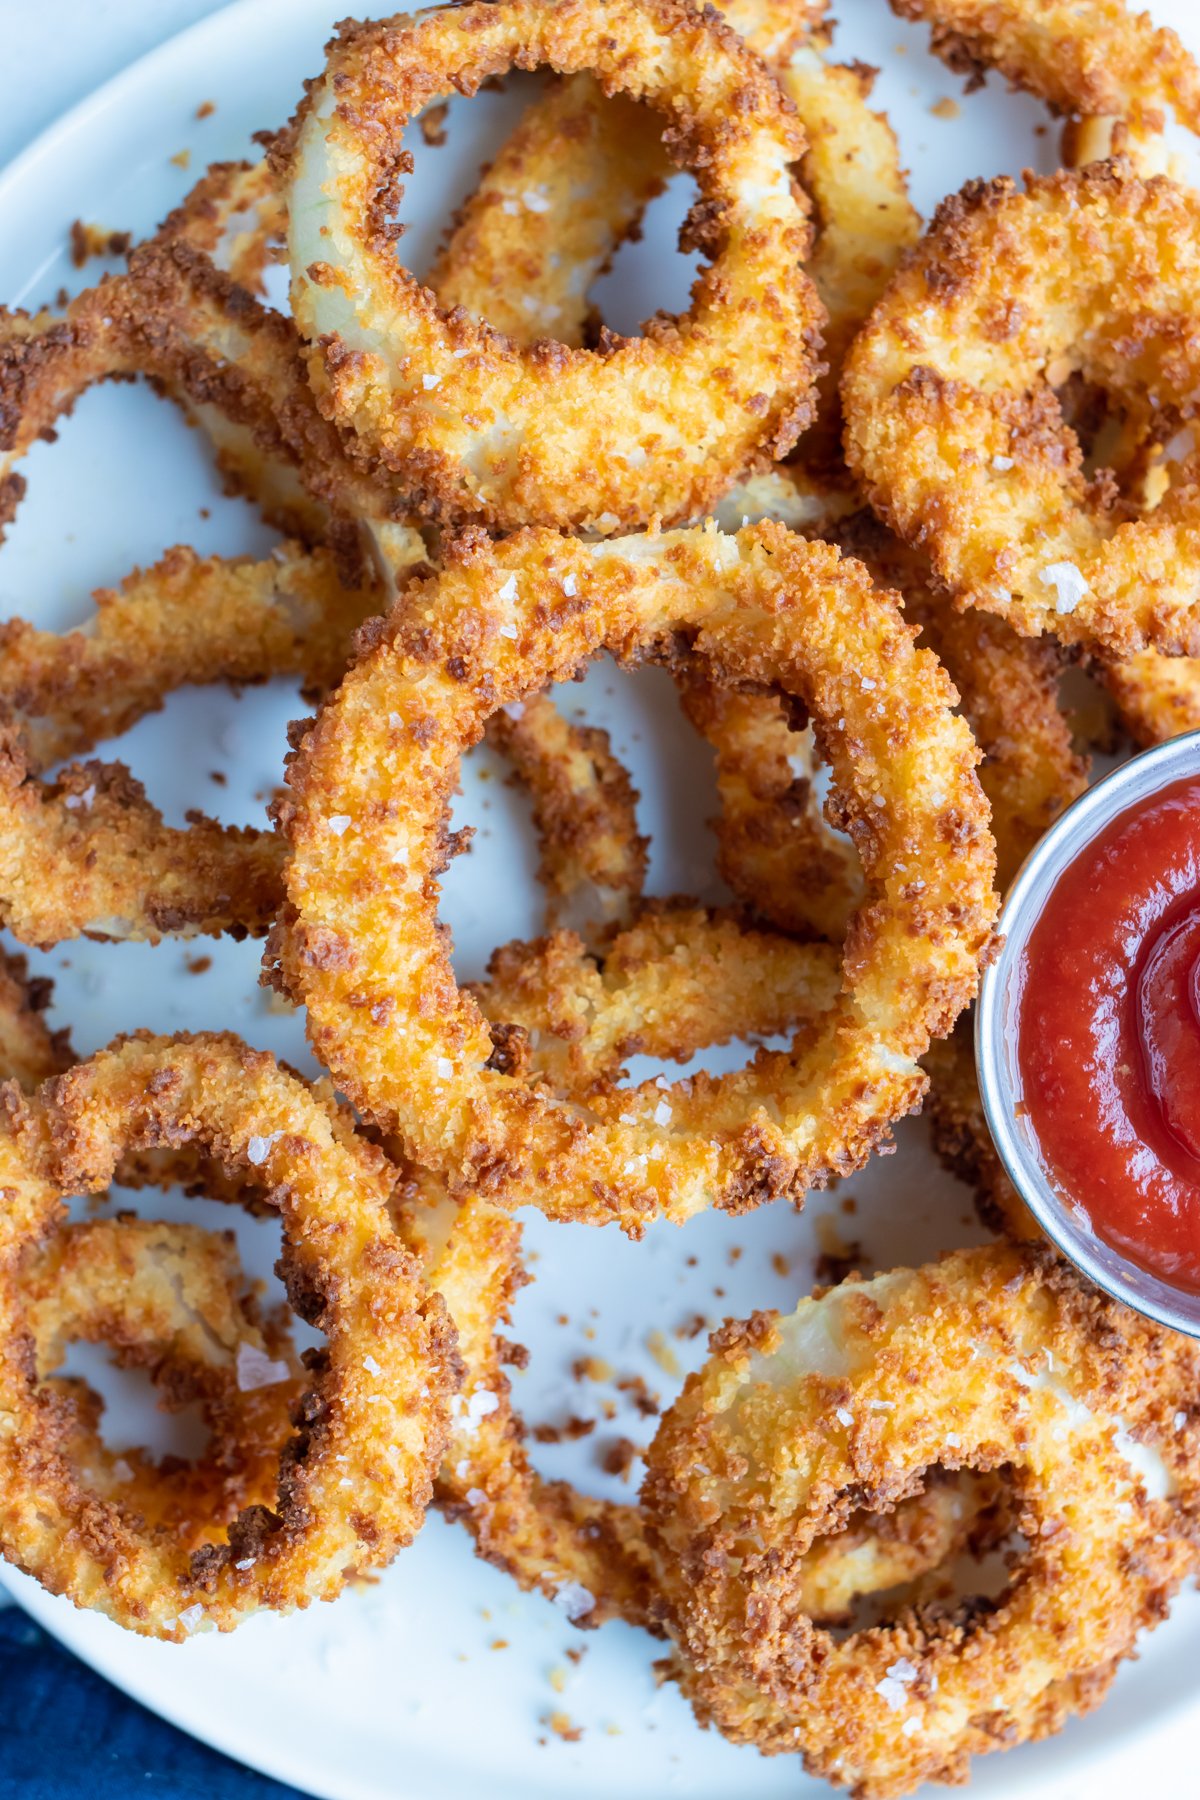 Onion rings are cooked in the air fryer until perfectly crispy and golden brown.